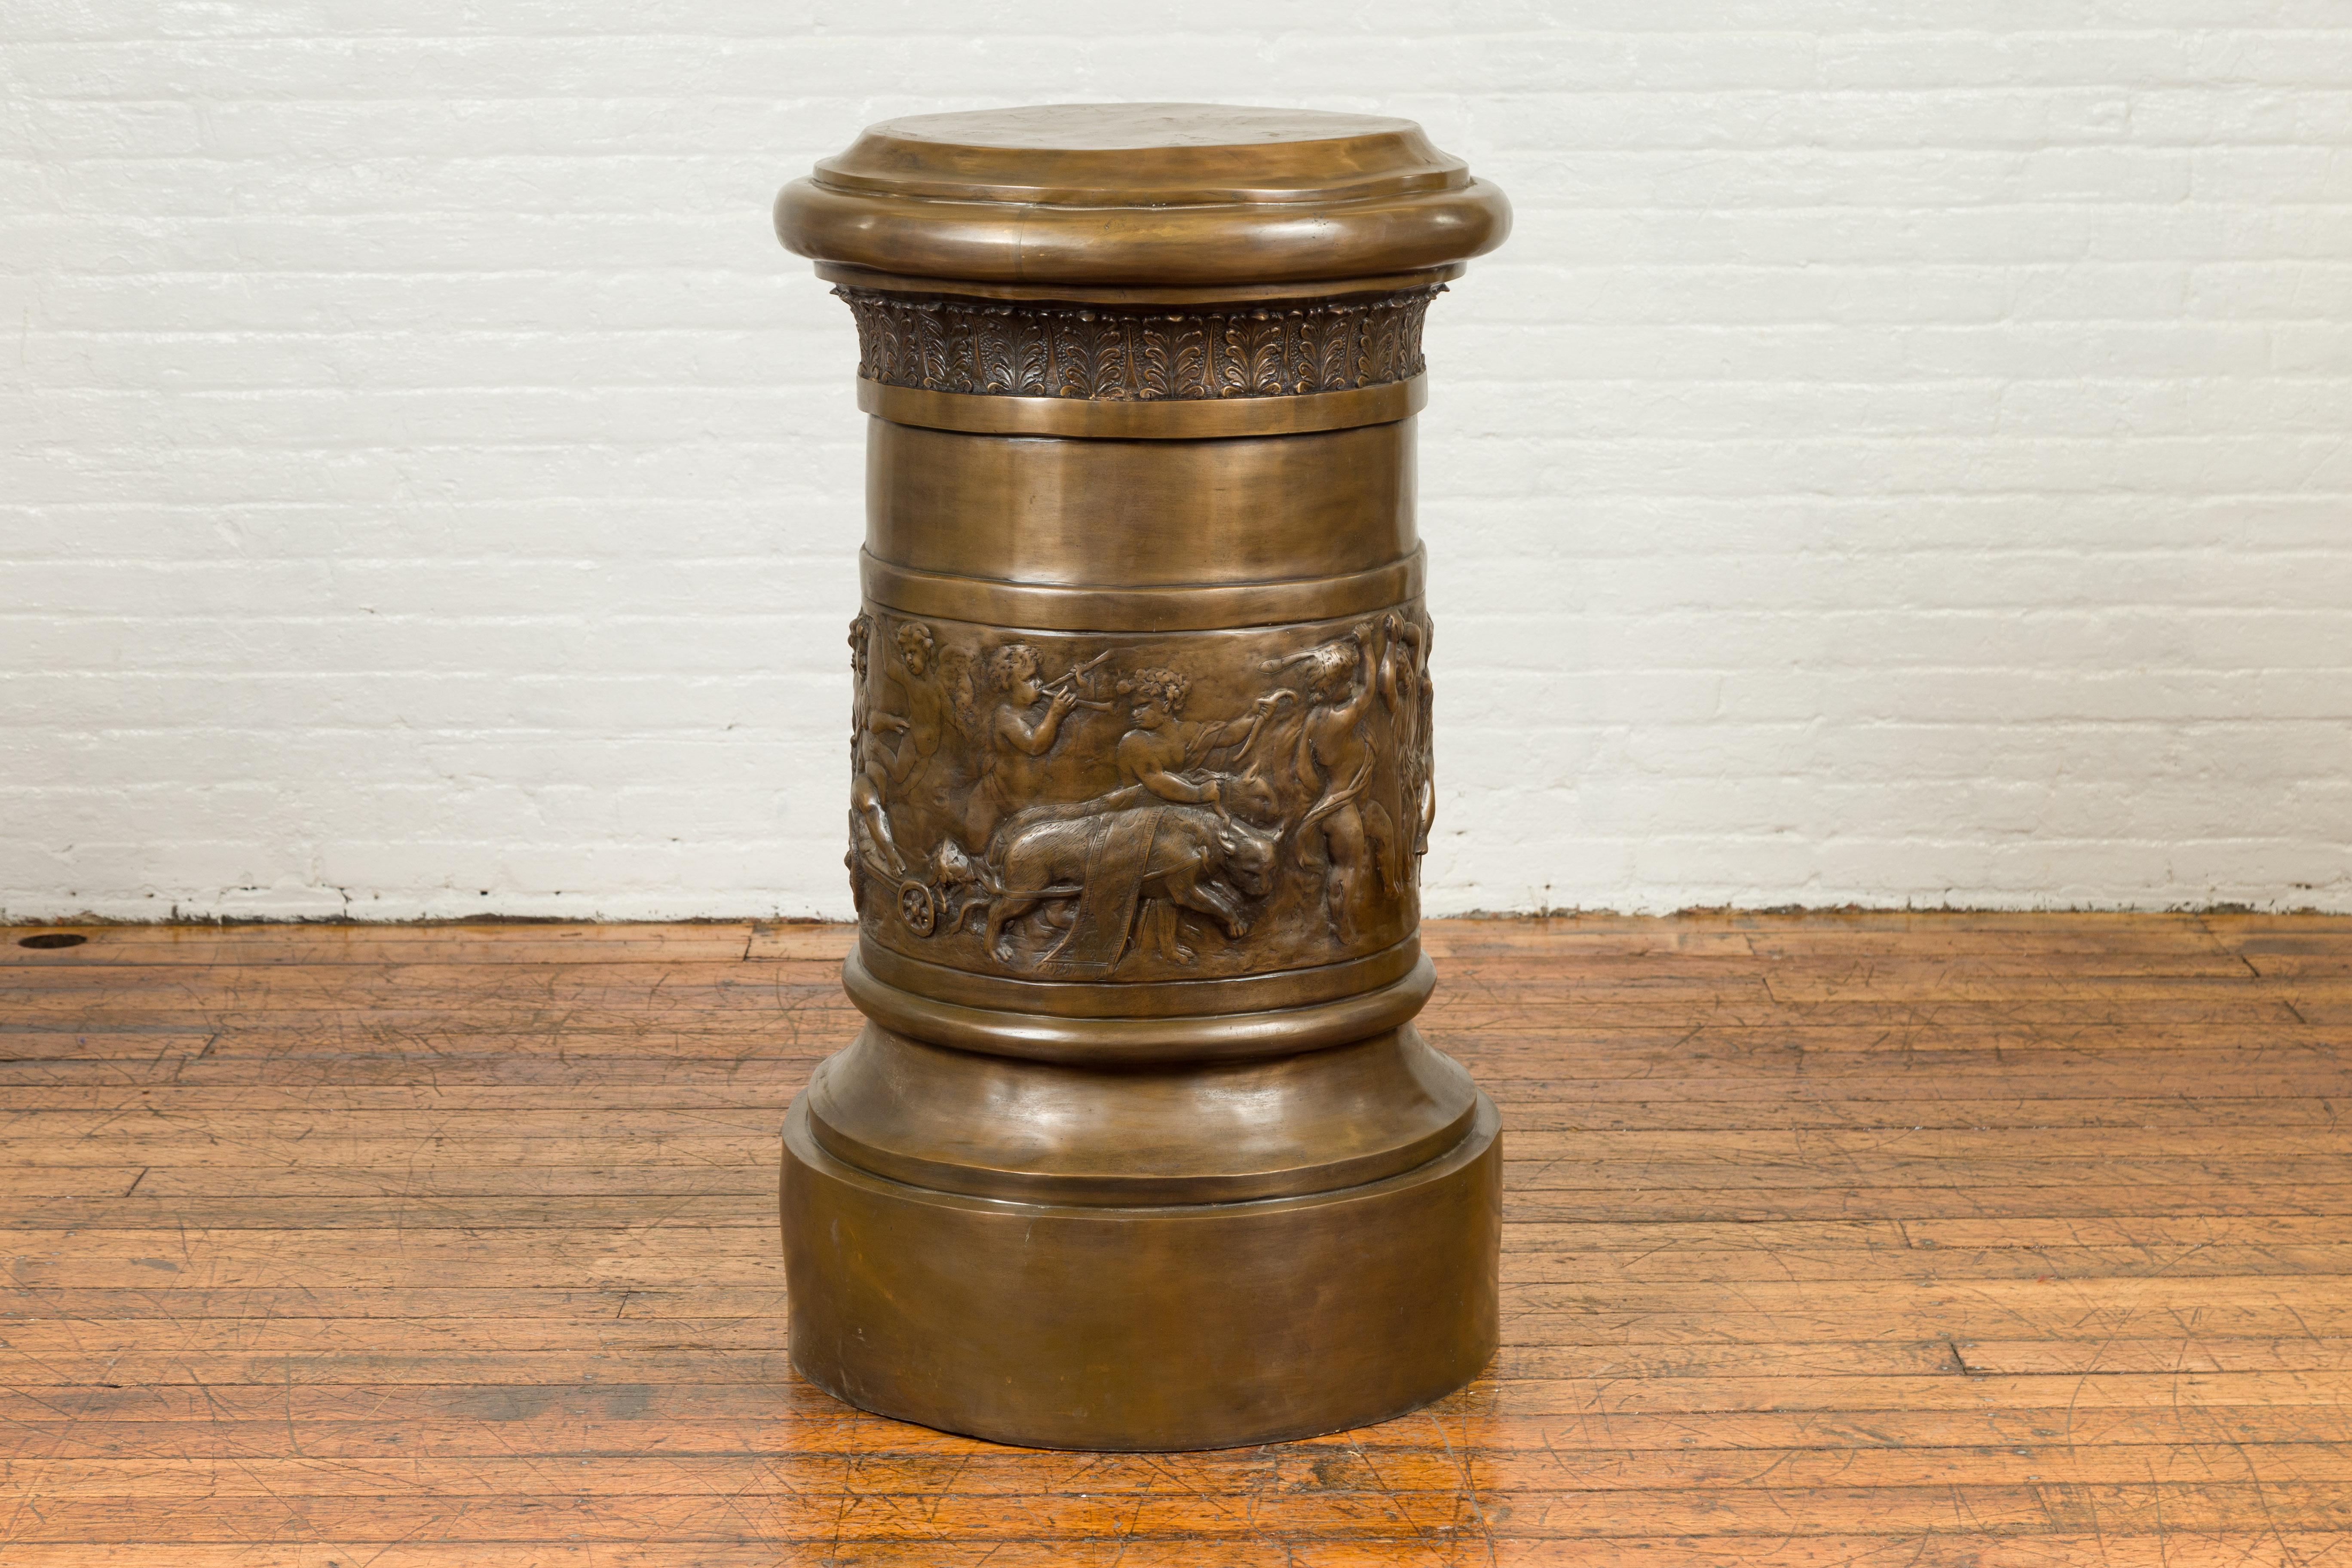 A large Greco-Roman style contemporary bronze pedestal base depicting a Bacchanalia. Created with the traditional technique of the lost-wax (à la cire perdue) that allows a great precision and finesse in the details, this Greco-Roman inspired bronze